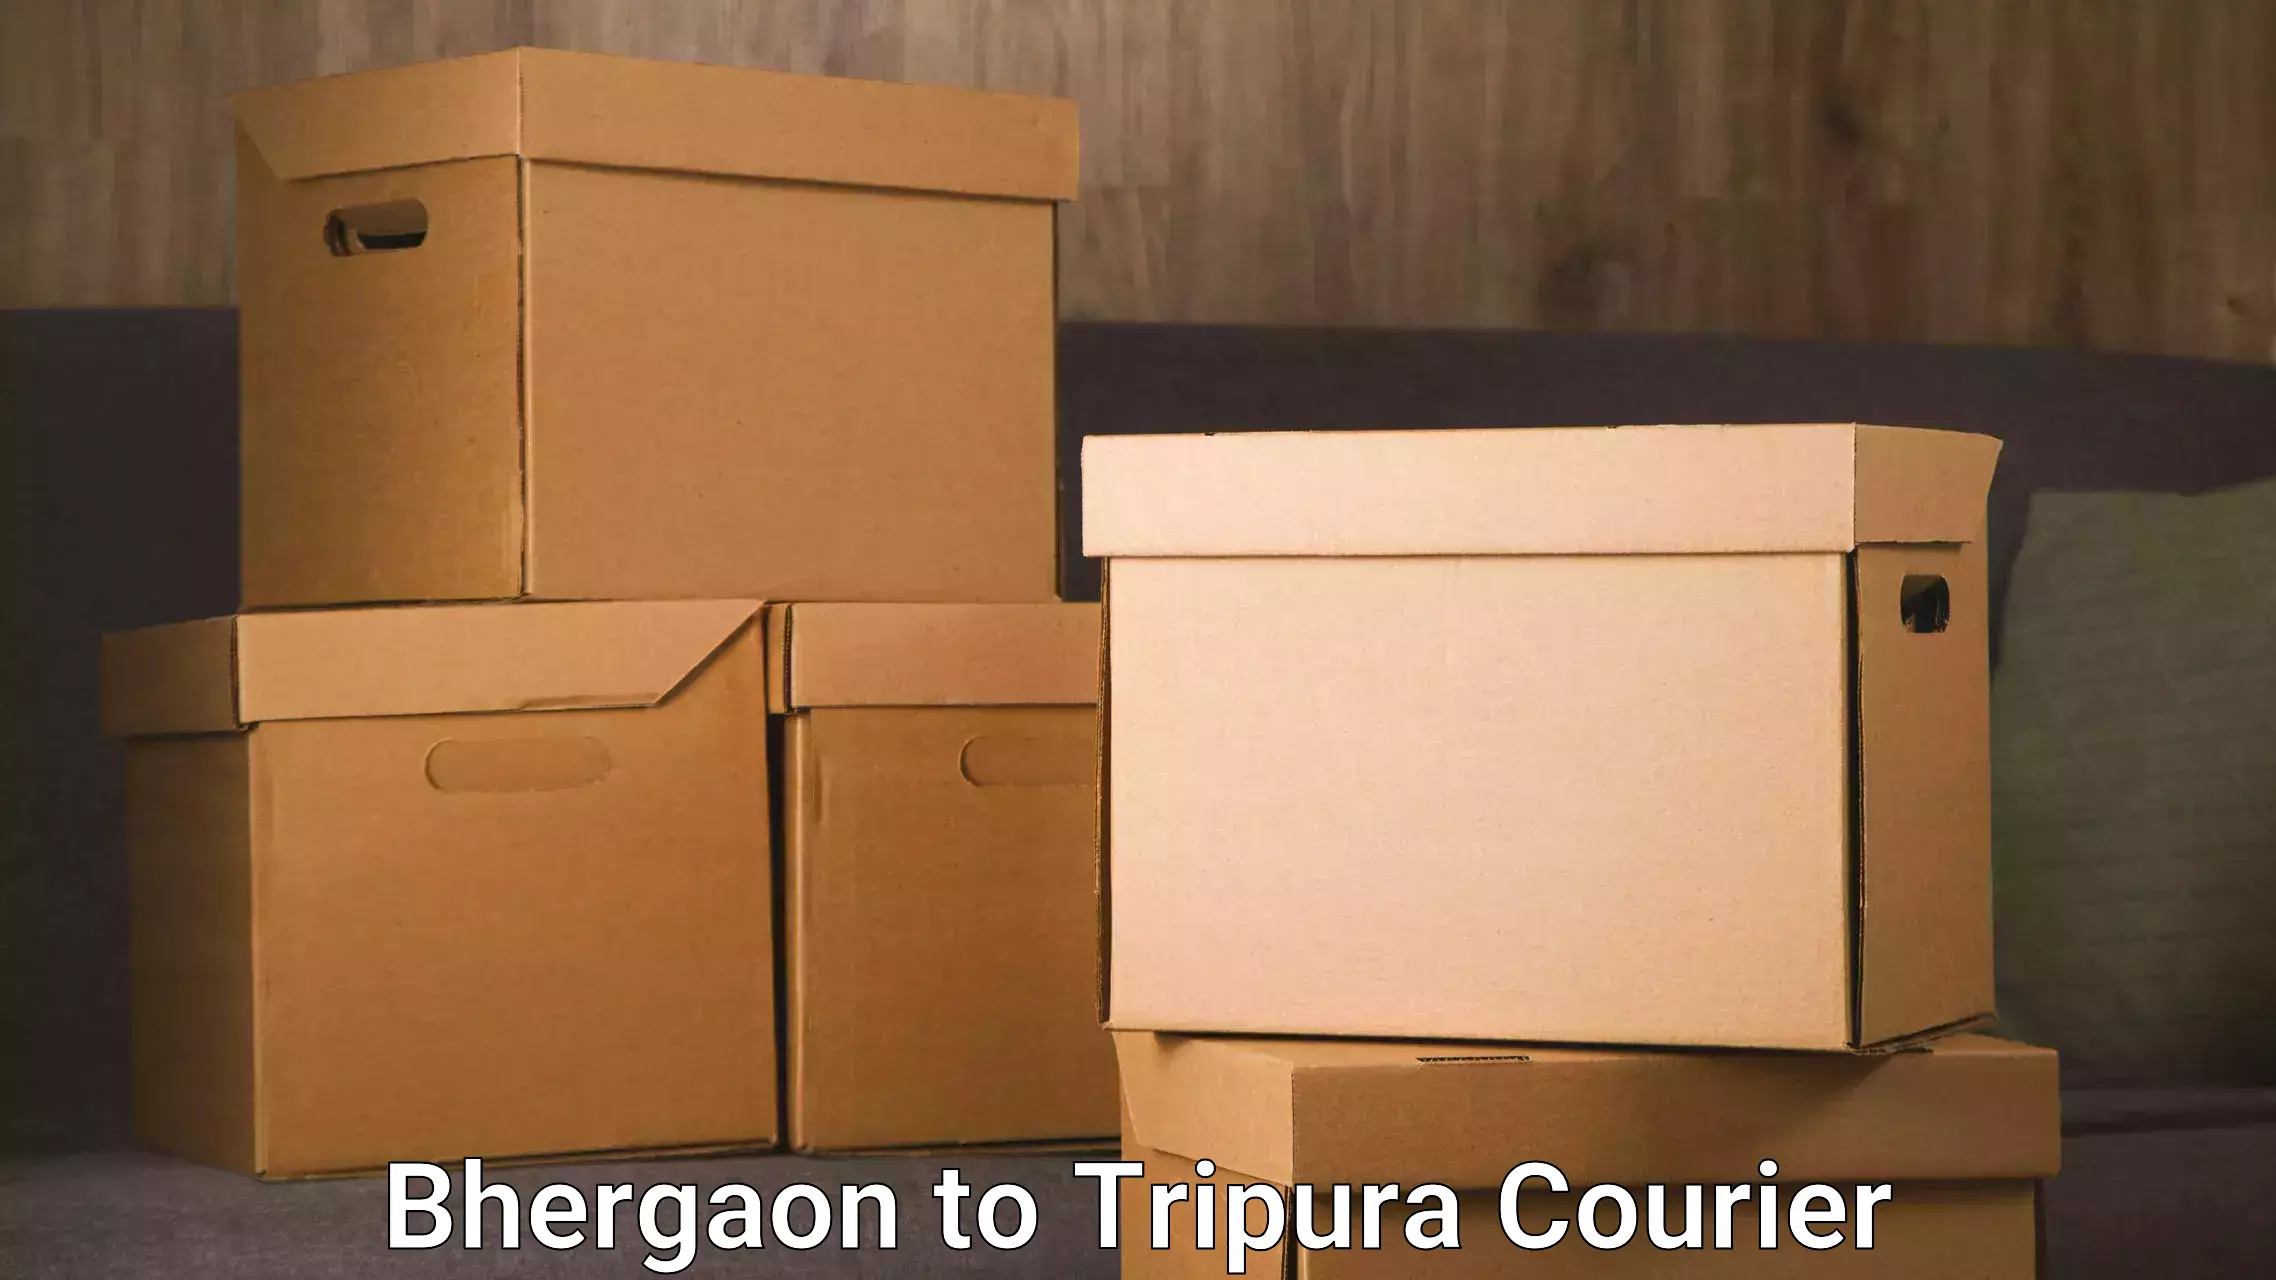 Reliable freight solutions Bhergaon to Udaipur Tripura